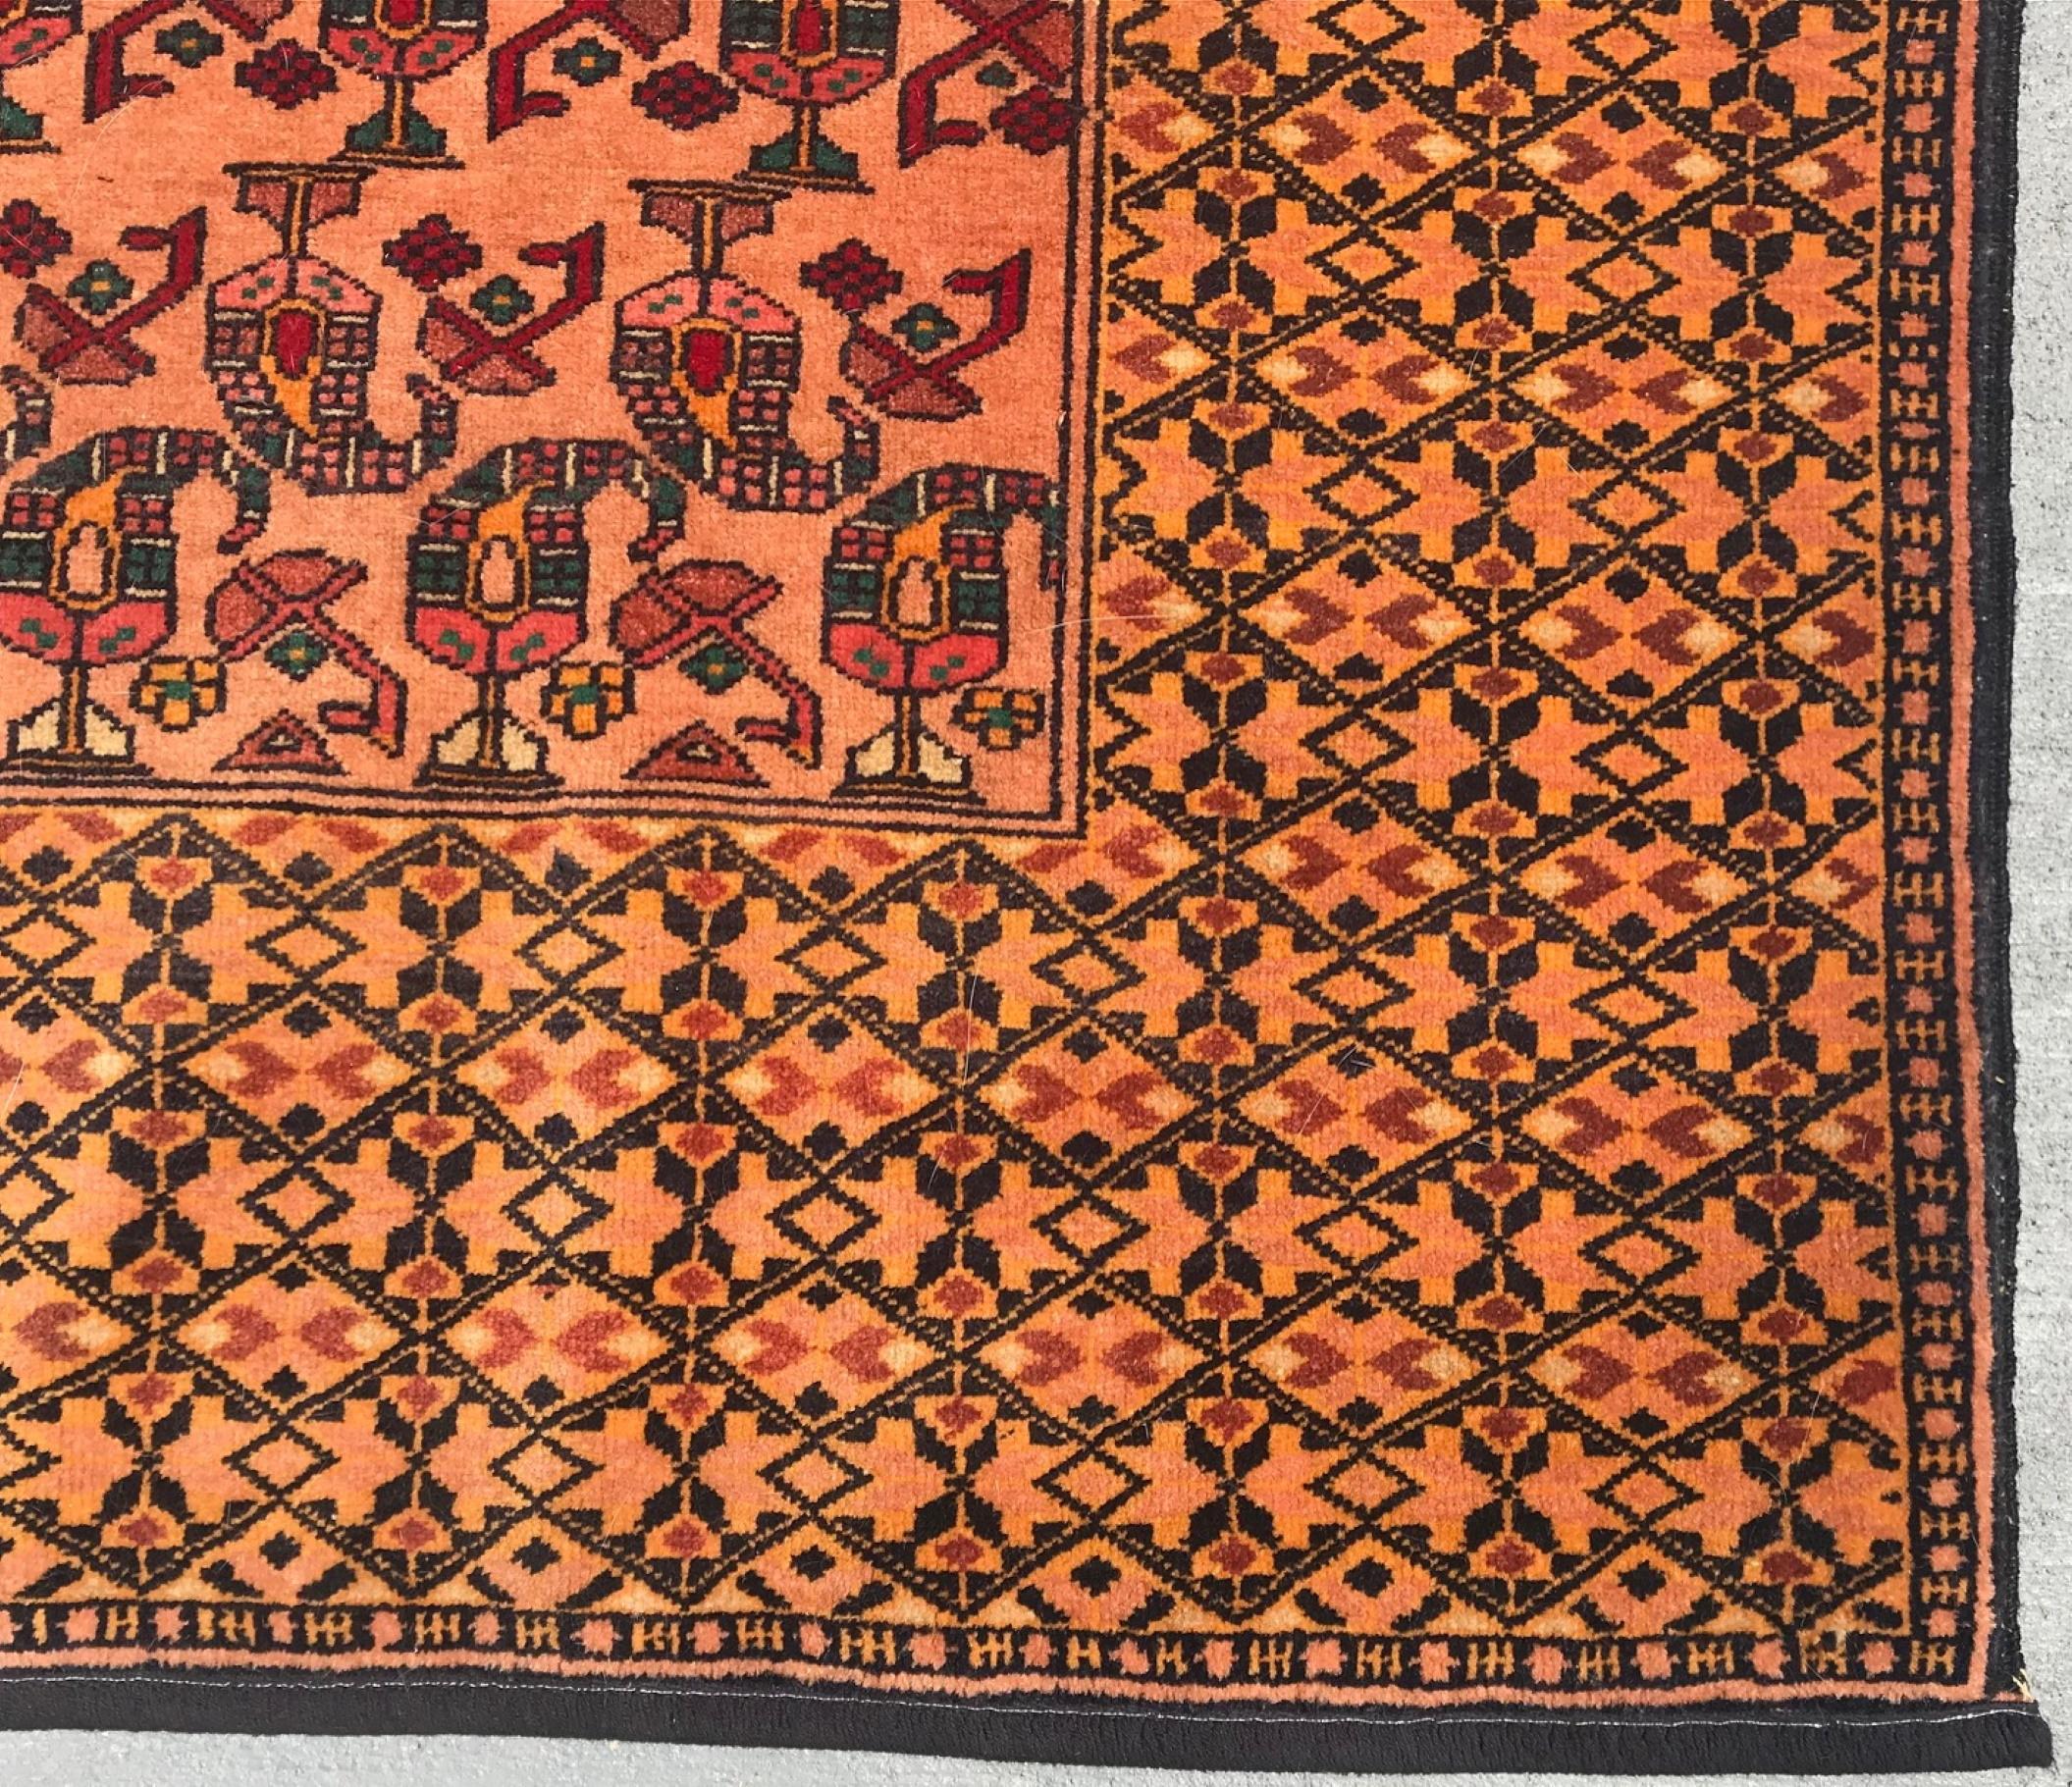 Mid 20th century hand woven Persian Bashir rug.

The circa 1950 Persian Bashir Zili Sultan Rug is hand woven with silk warp. It is very finely and distinctly woven with in a quiet Boteh motif pattern. The allover color is rich coral.